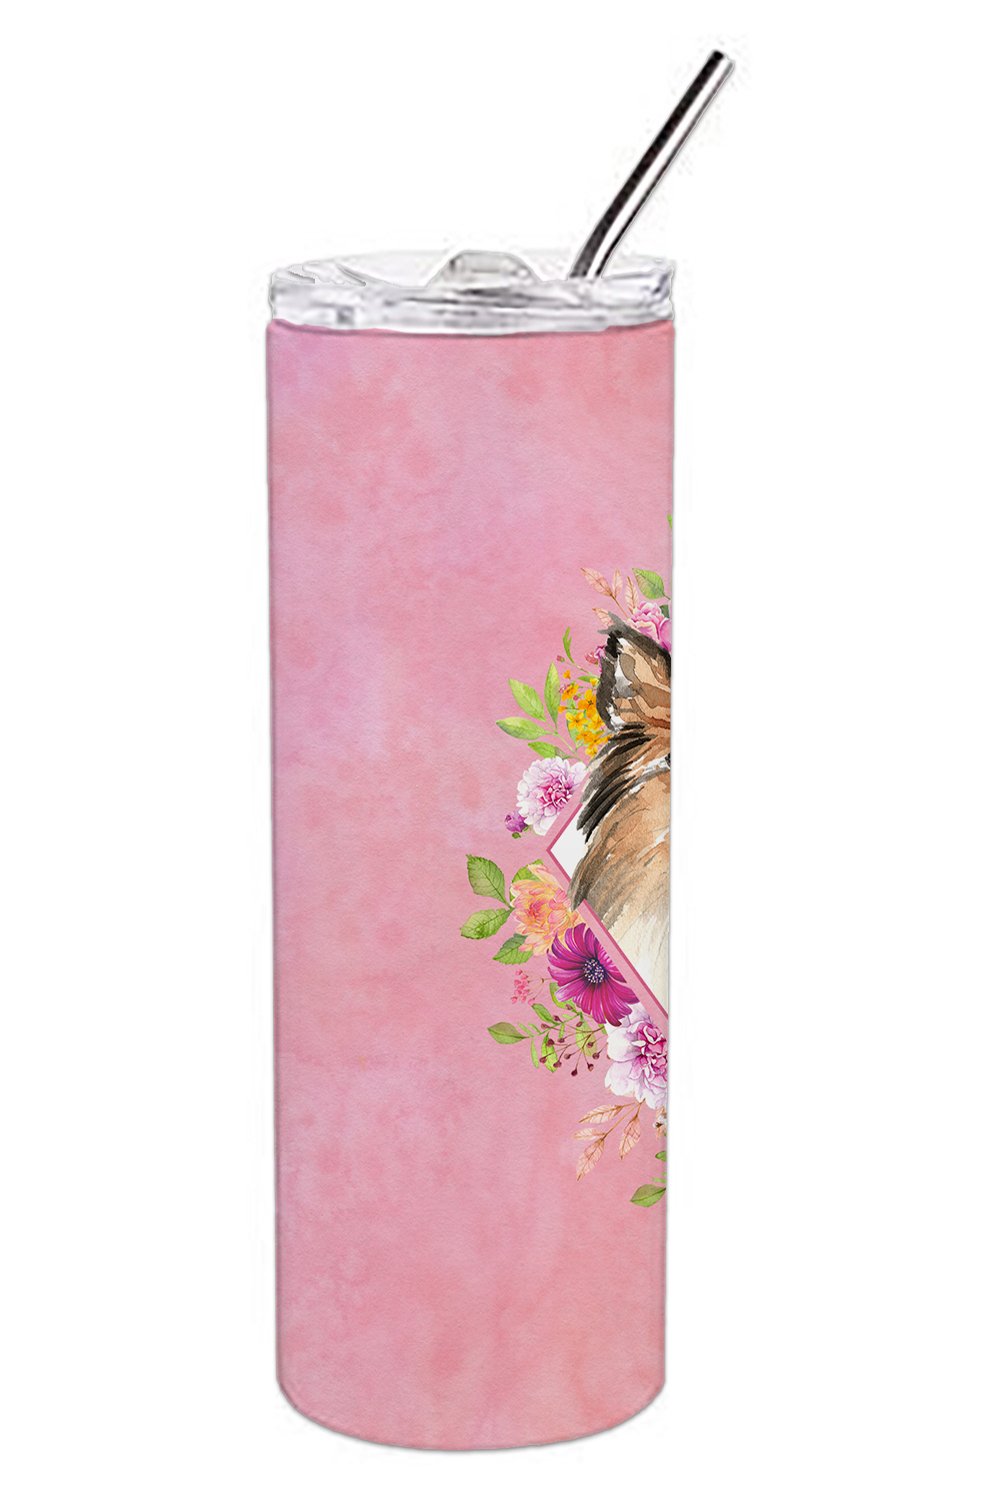 Sheltie Pink Flowers Double Walled Stainless Steel 20 oz Skinny Tumbler CK4213TBL20 by Caroline's Treasures